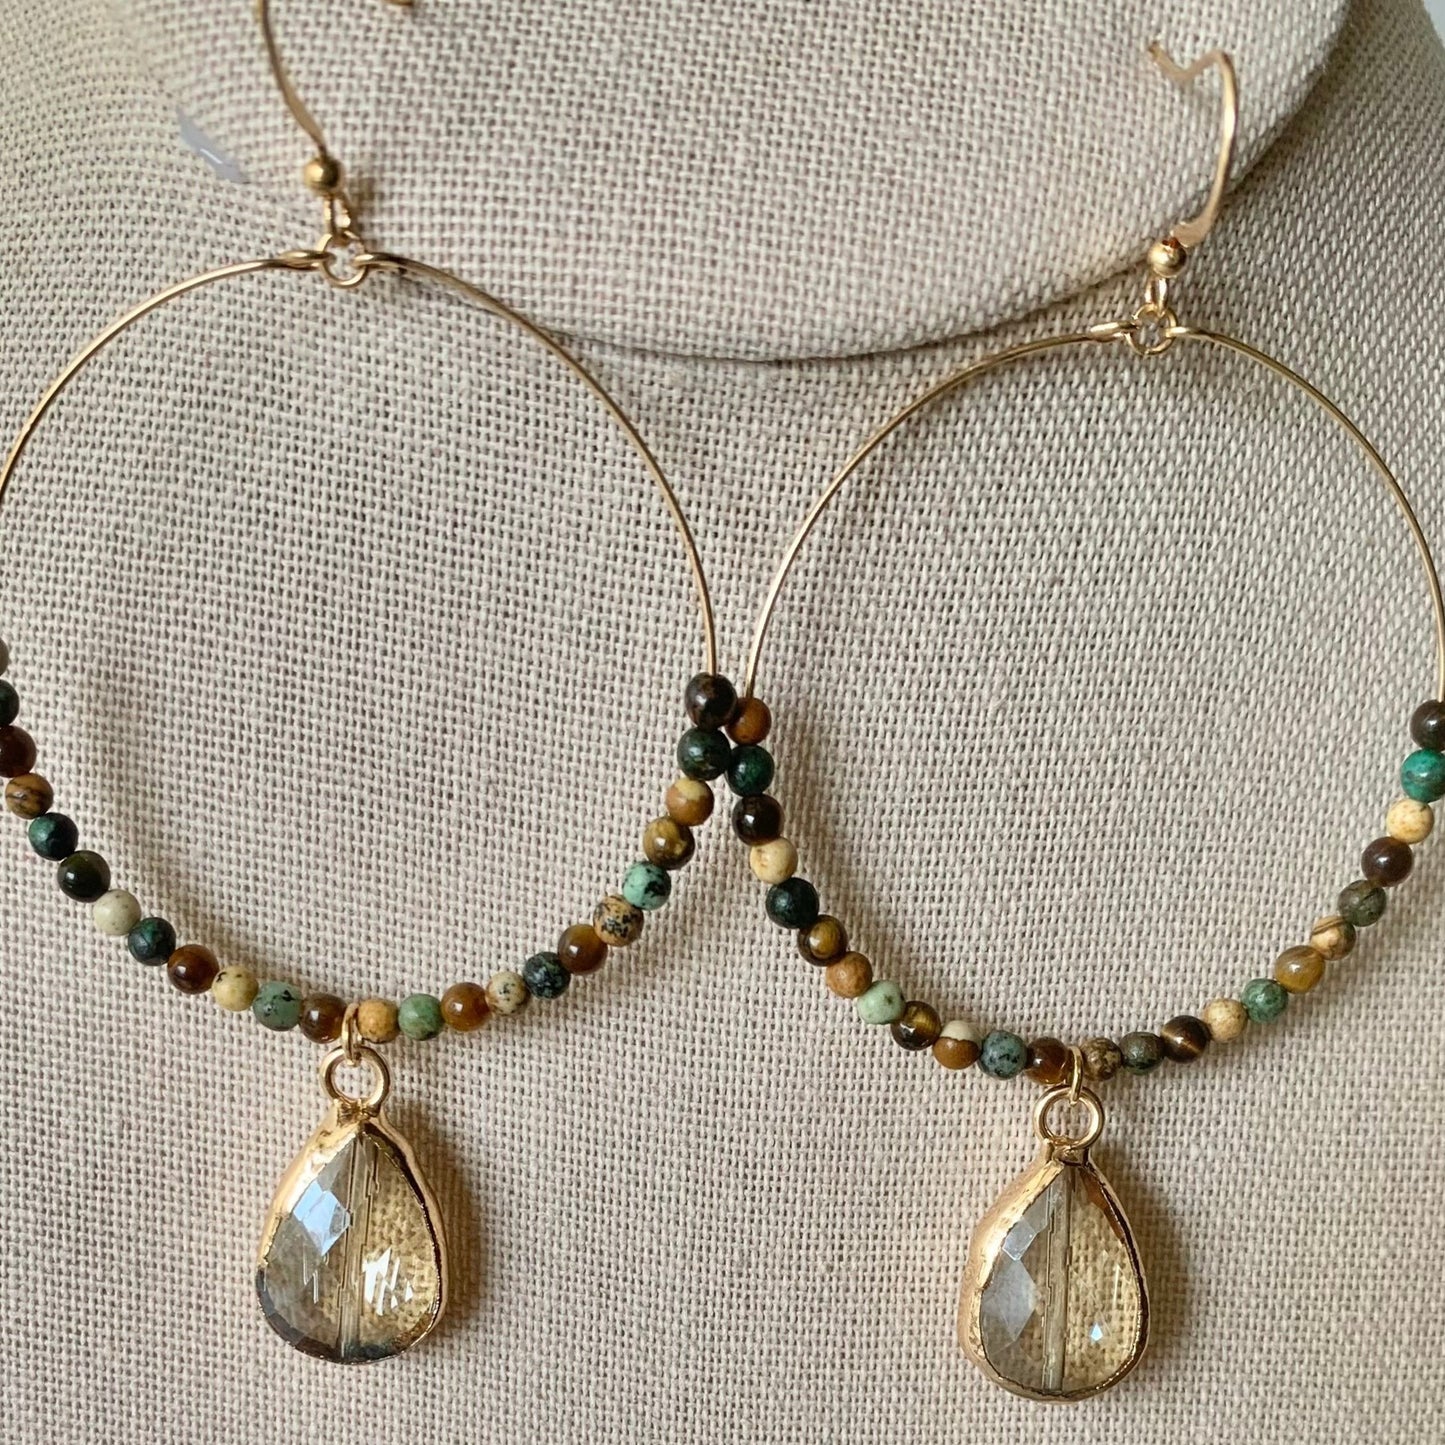 Gold Multi Colored Earrings with Crystal